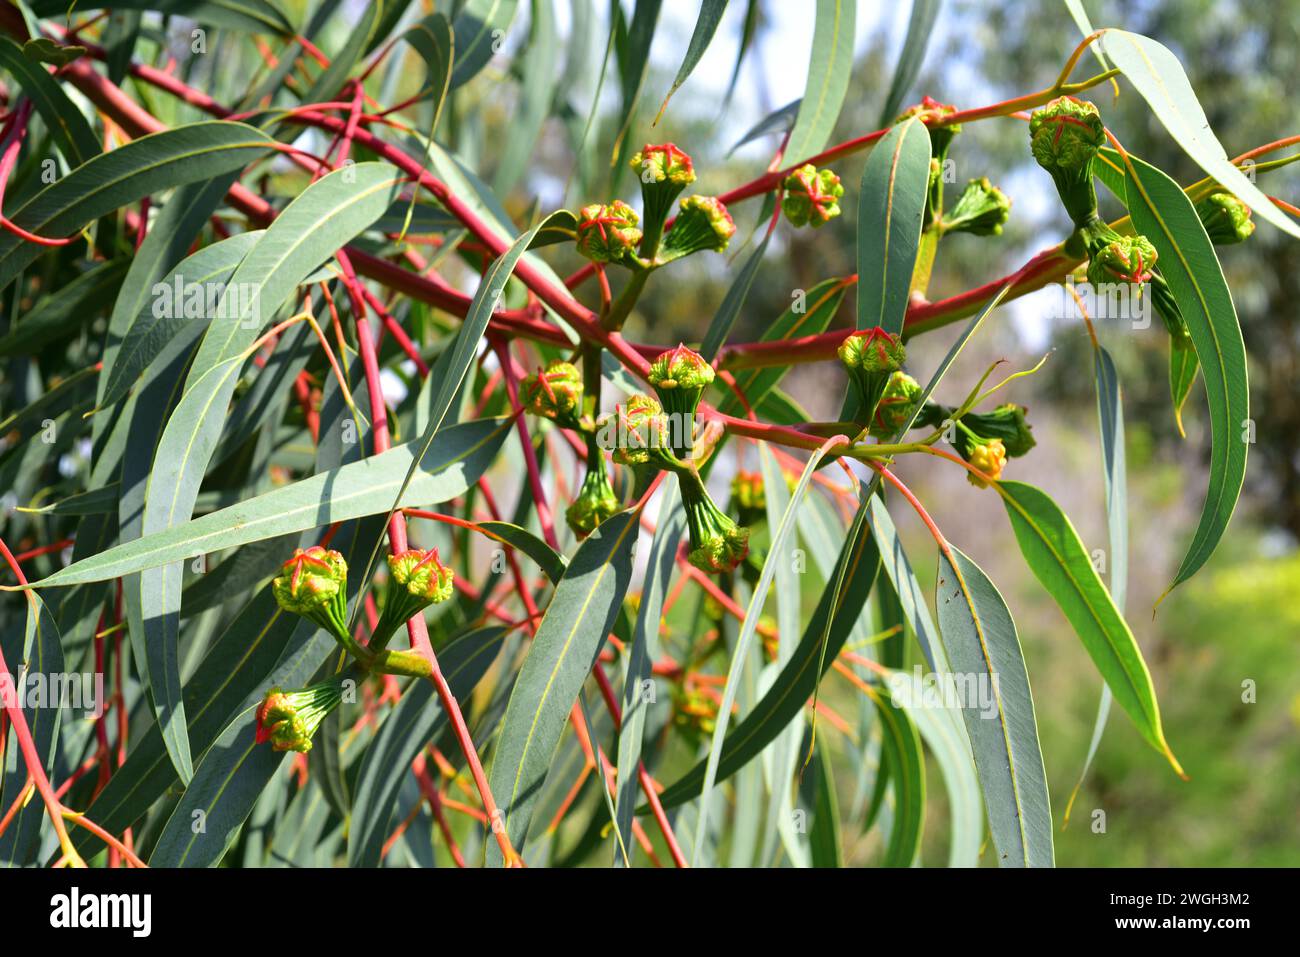 Illyarrie or red-capped gum (Eucalyptus erythrocorys) is a tree native to western Australia. Floral buds and leaves detail. Stock Photo